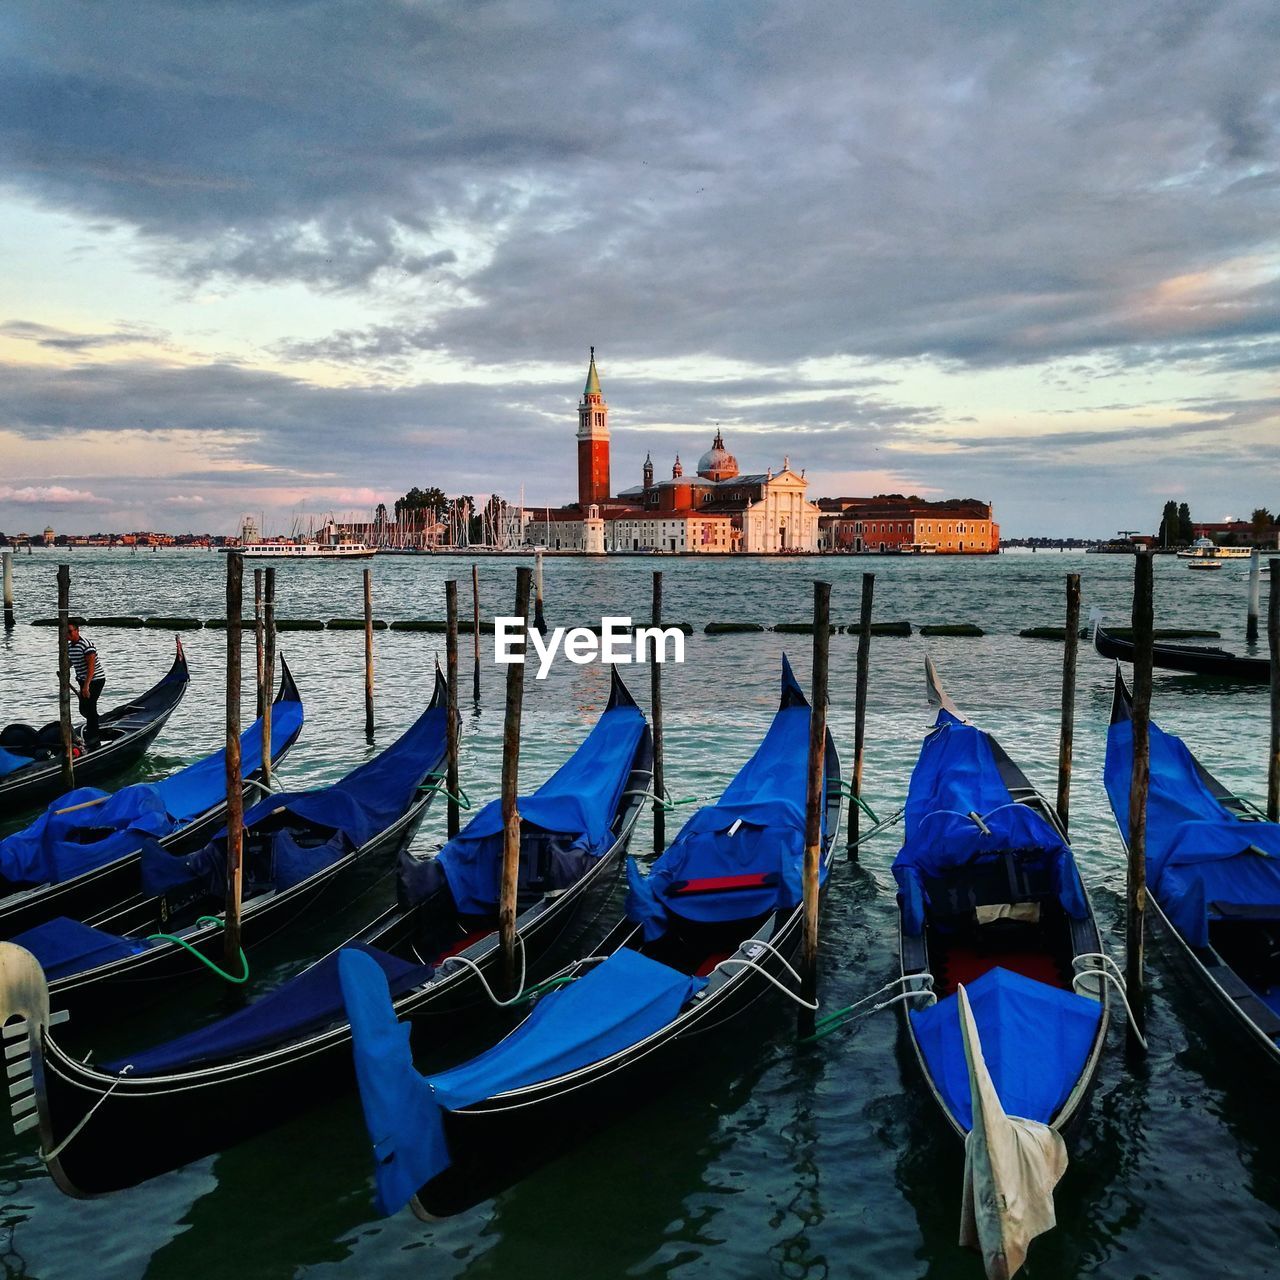 Gondola boats moored by wooden posts in grand canal against cloudy sky during sunset